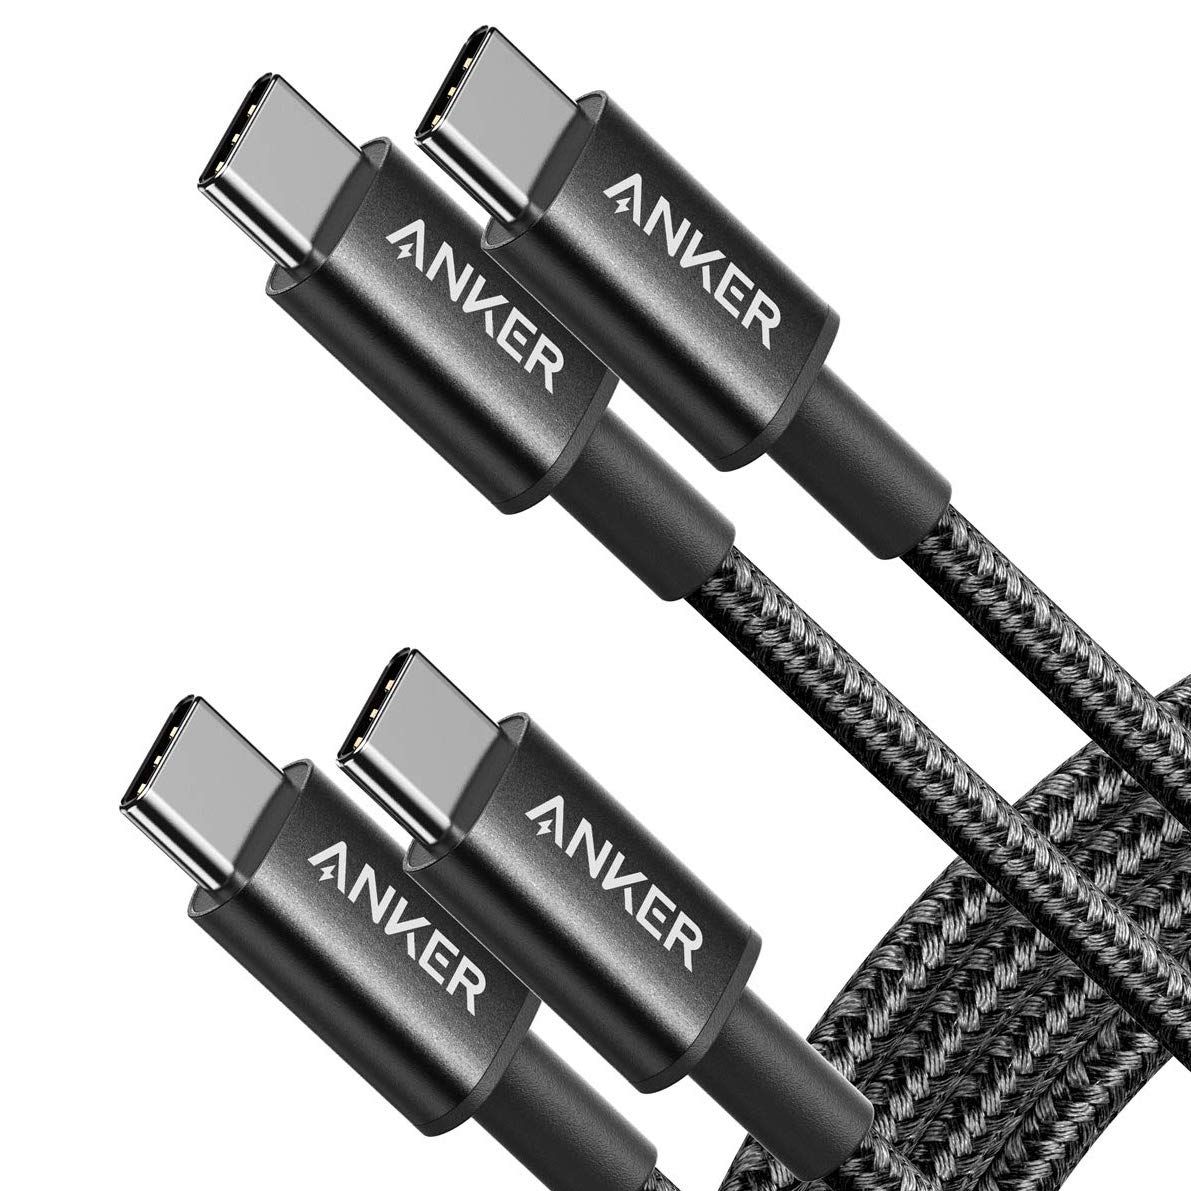 Anker USB-C Charging Cables pointing upwards